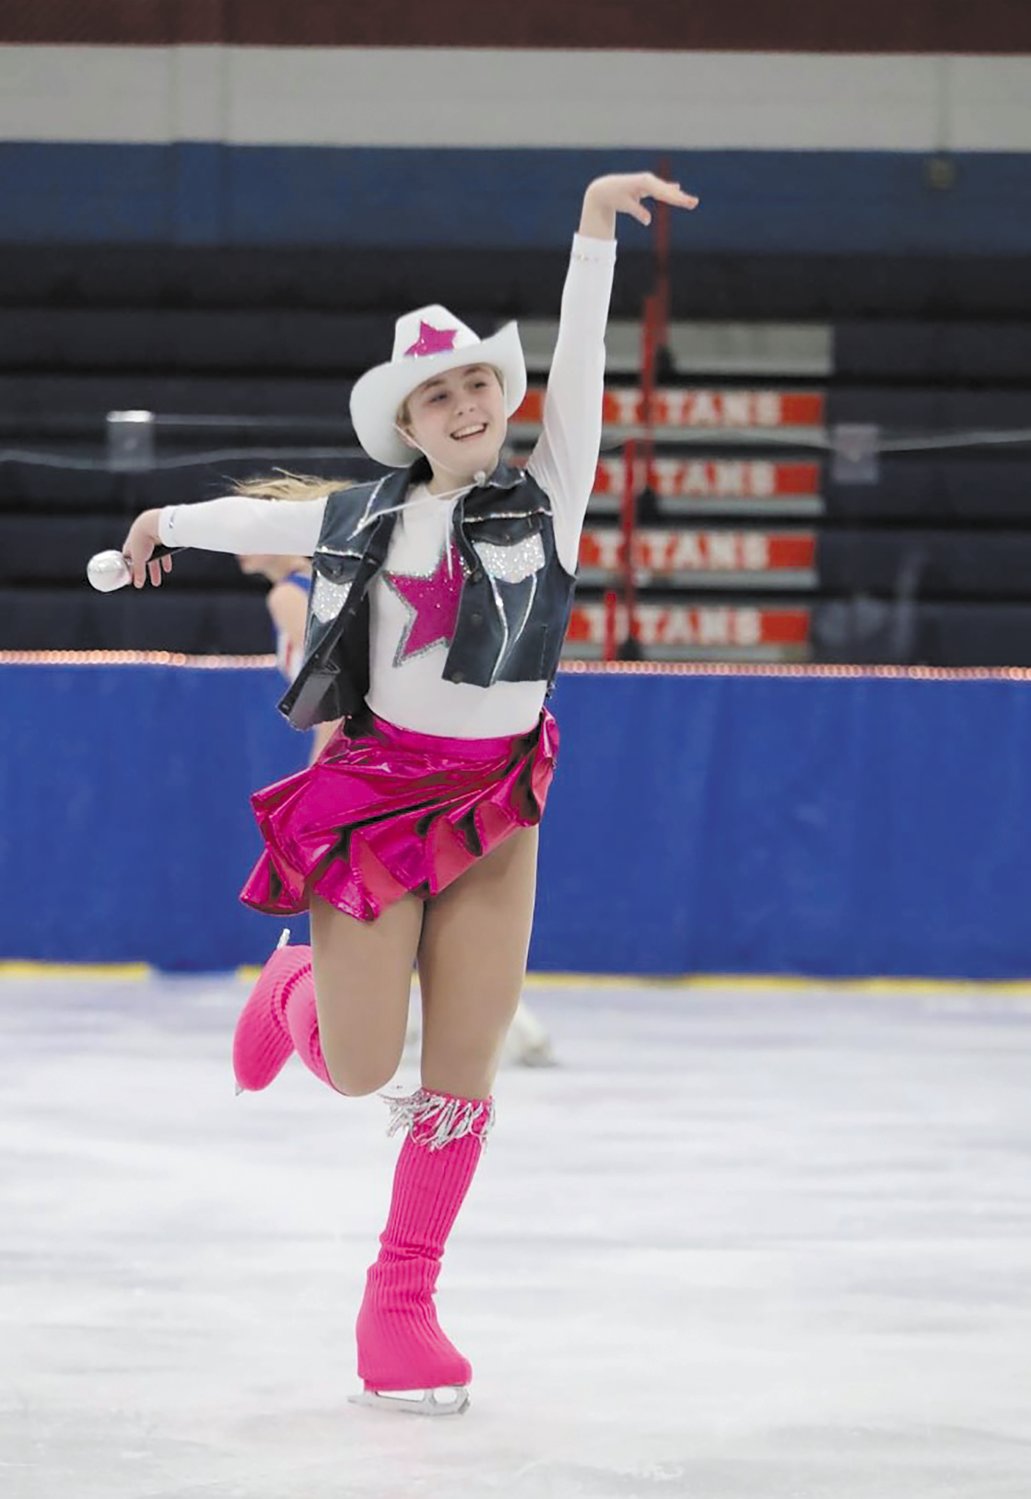 PARTY IN THE USA: Fifteen year old Kinzy Landy skates to Miley Cyrus’s 2009’s Ice Crean Freeze. She is the ninth grade at Exeter West Greenwich High School.